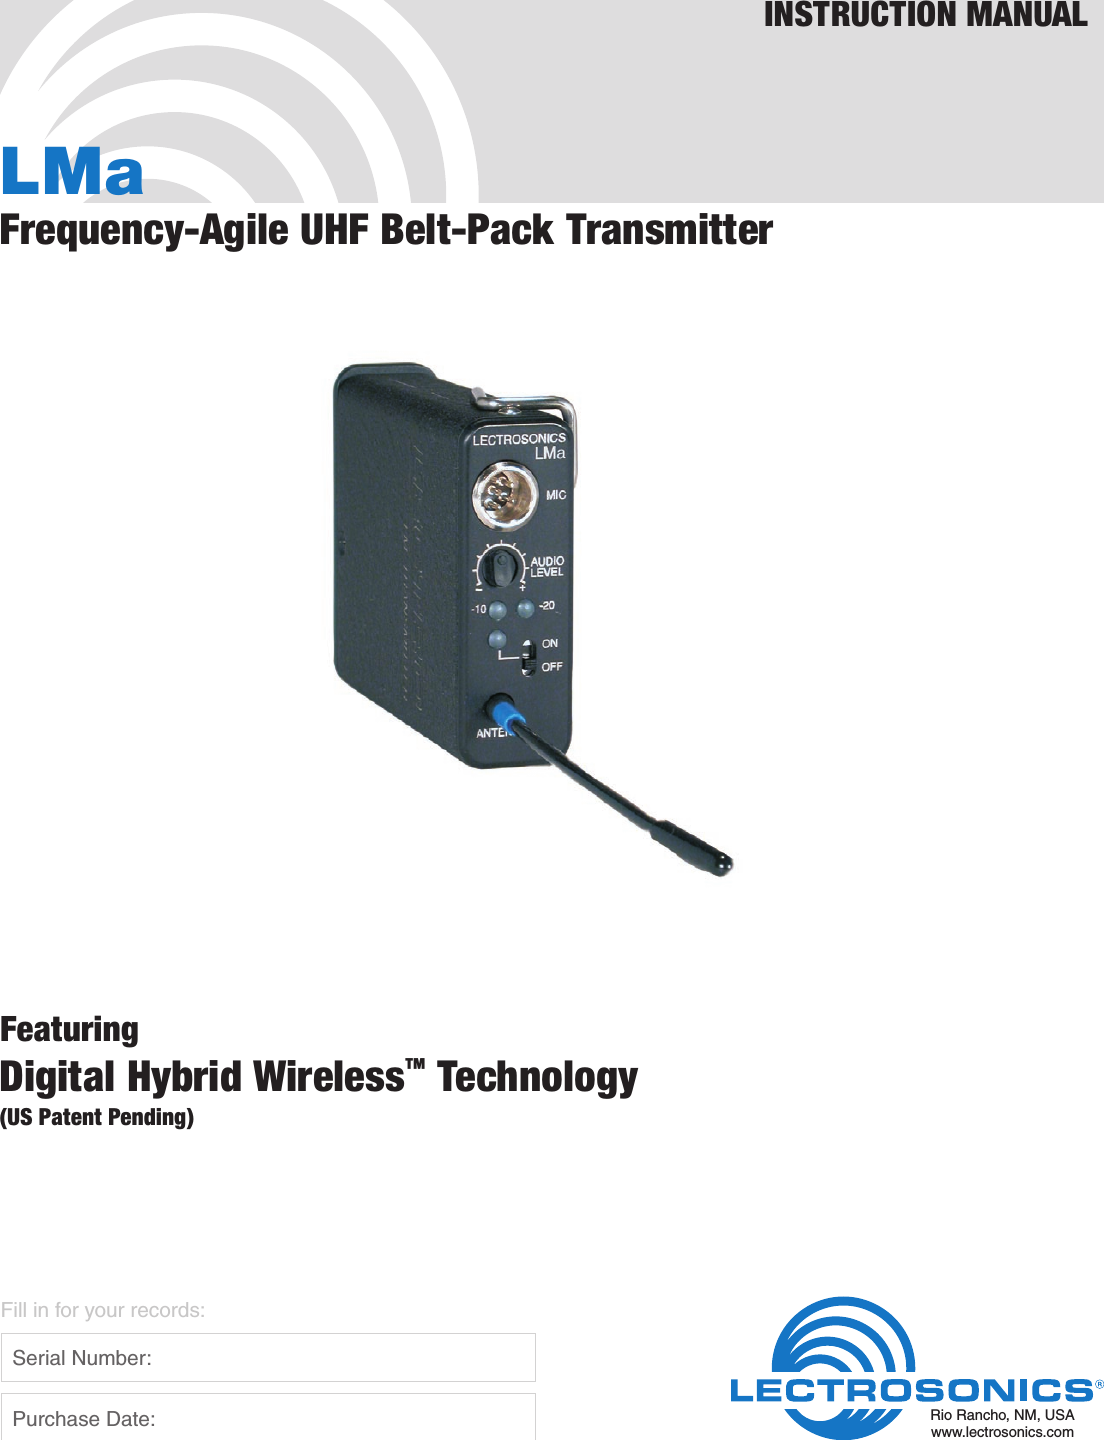 LMaFrequency-Agile UHF Belt-Pack TransmitterFeaturingDigital Hybrid Wireless™ Technology(US Patent Pending)INSTRUCTION MANUALRio Rancho, NM, USAwww.lectrosonics.comFill in for your records:  Serial Number:  Purchase Date: